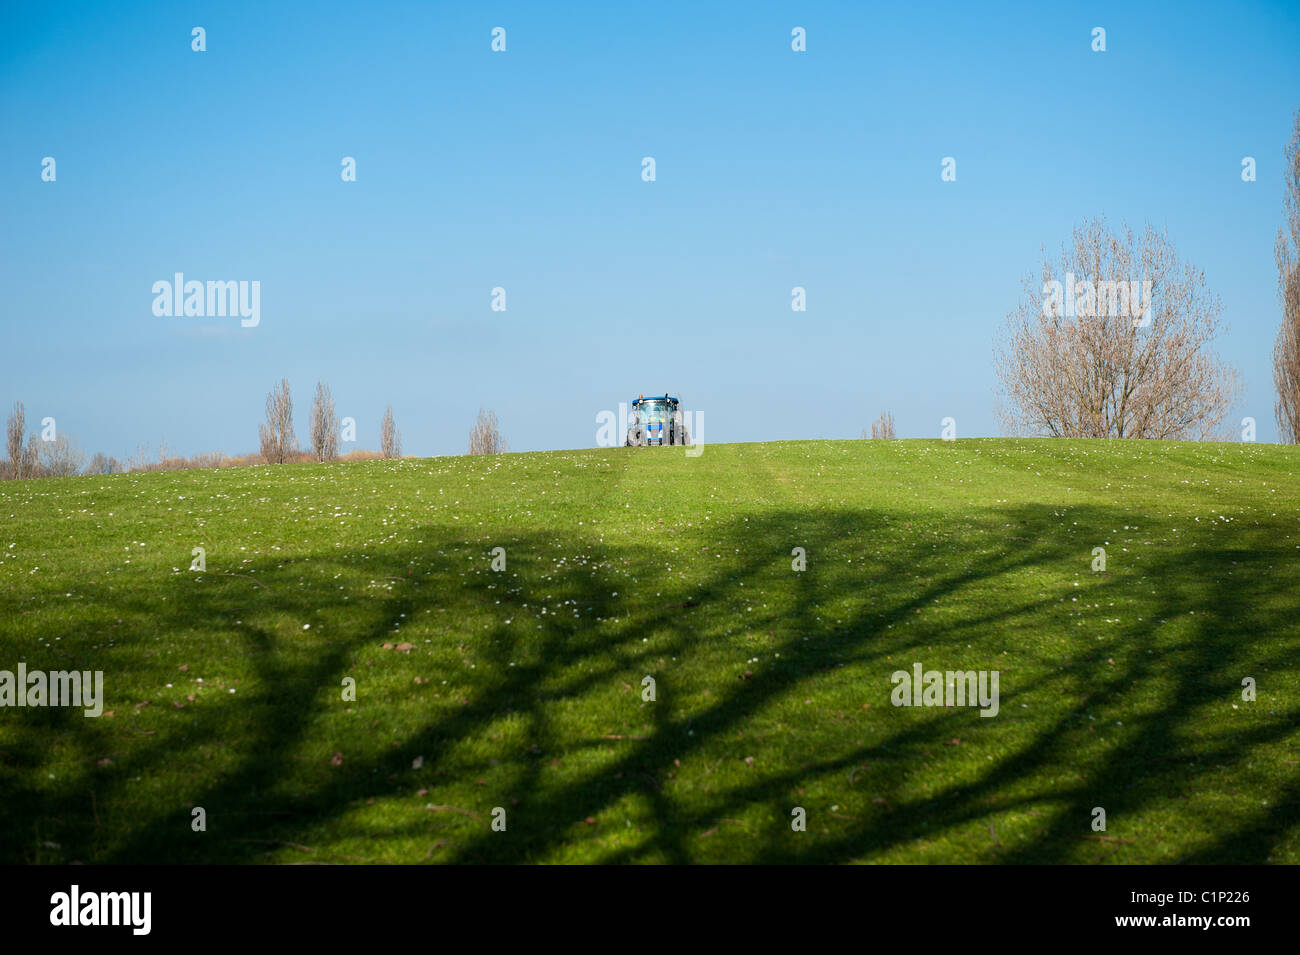 A council tractor approaches as it cuts the grass in a council run park in Basildon, Essex. UK. Stock Photo